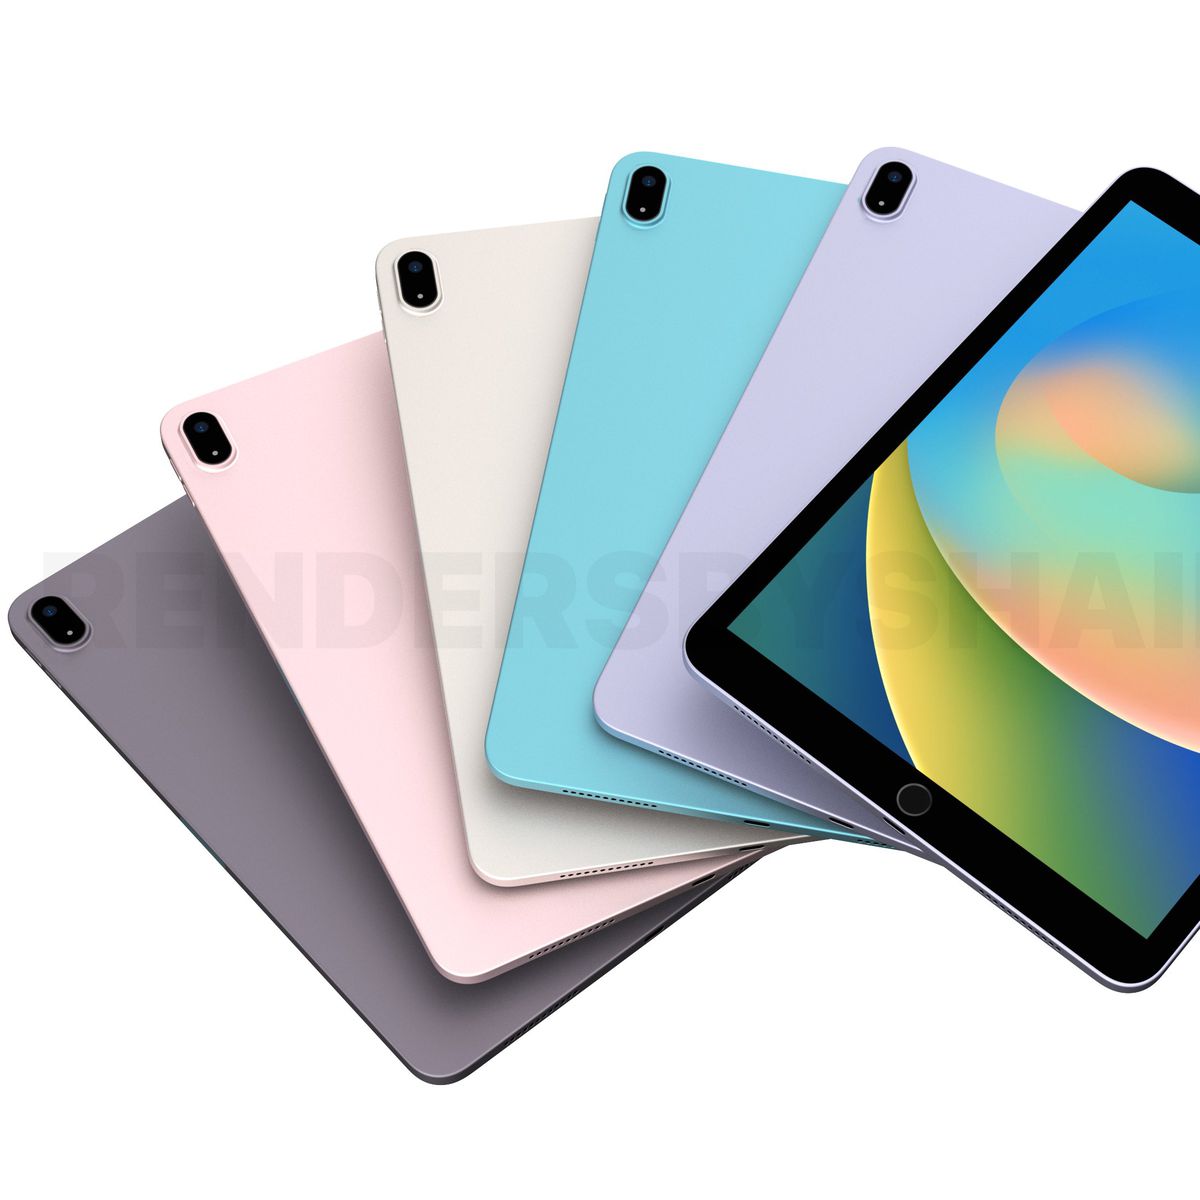 10th-Generation iPad With Major Design Changes Reportedly in